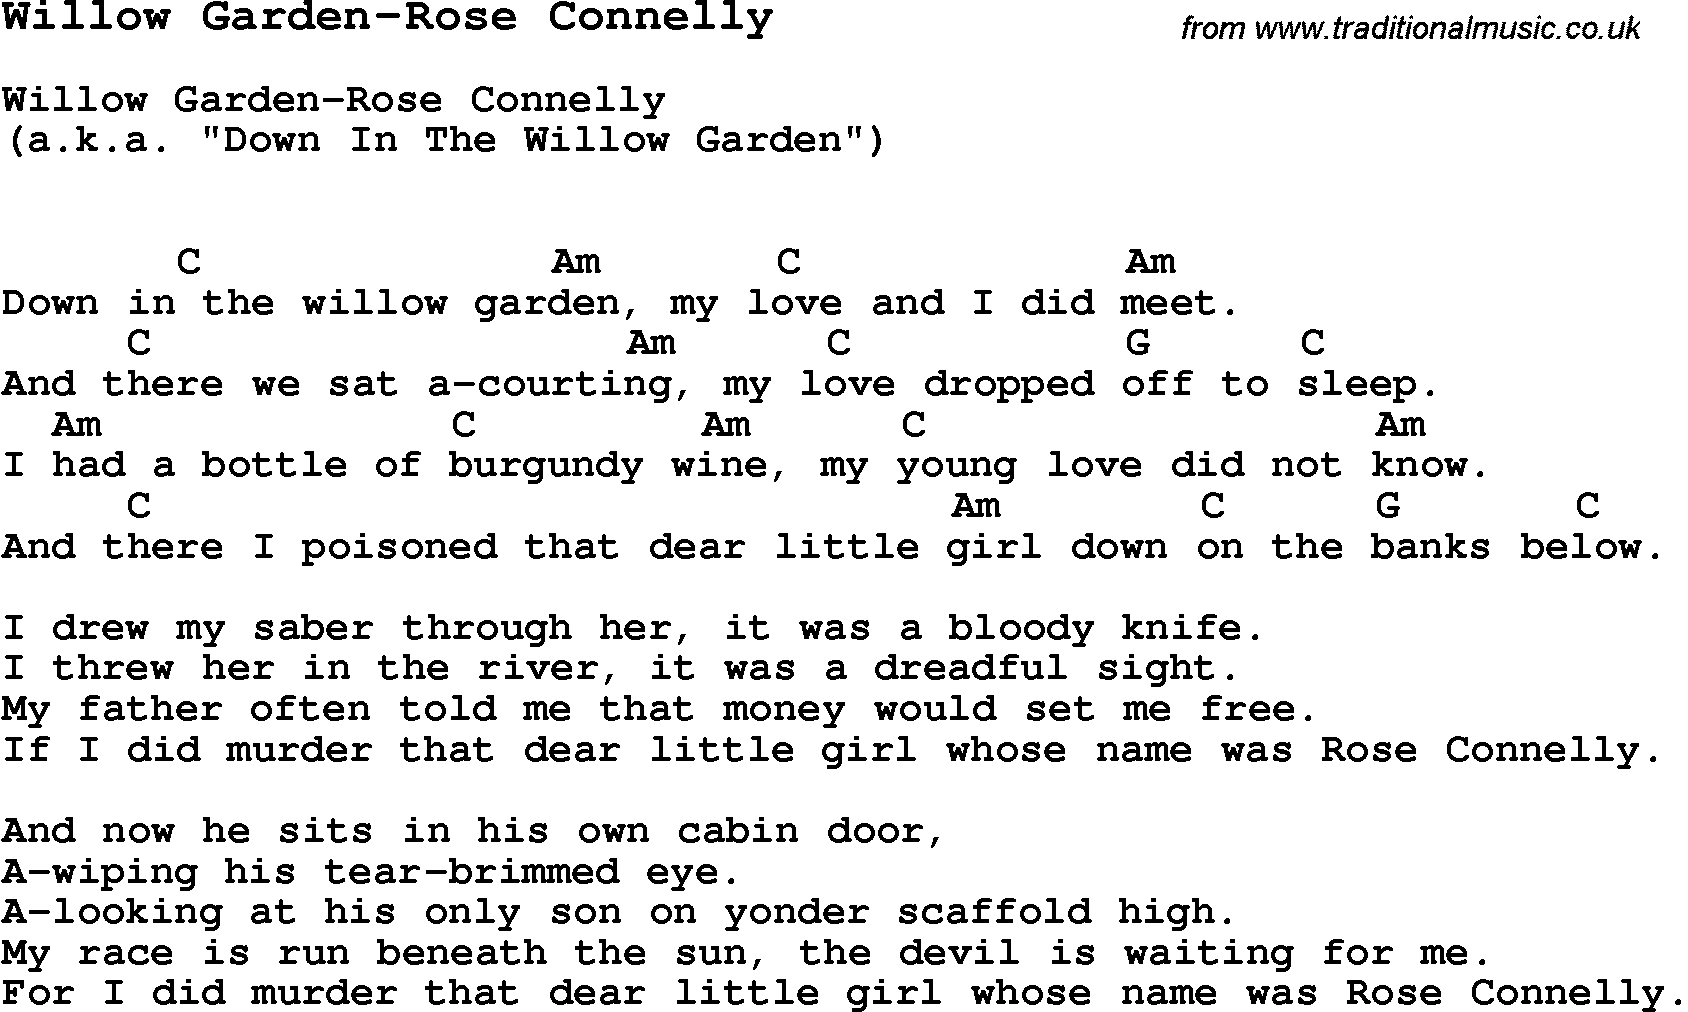 Summer-Camp Song, Willow Garden-Rose Connelly, with lyrics and chords for Ukulele, Guitar Banjo etc.